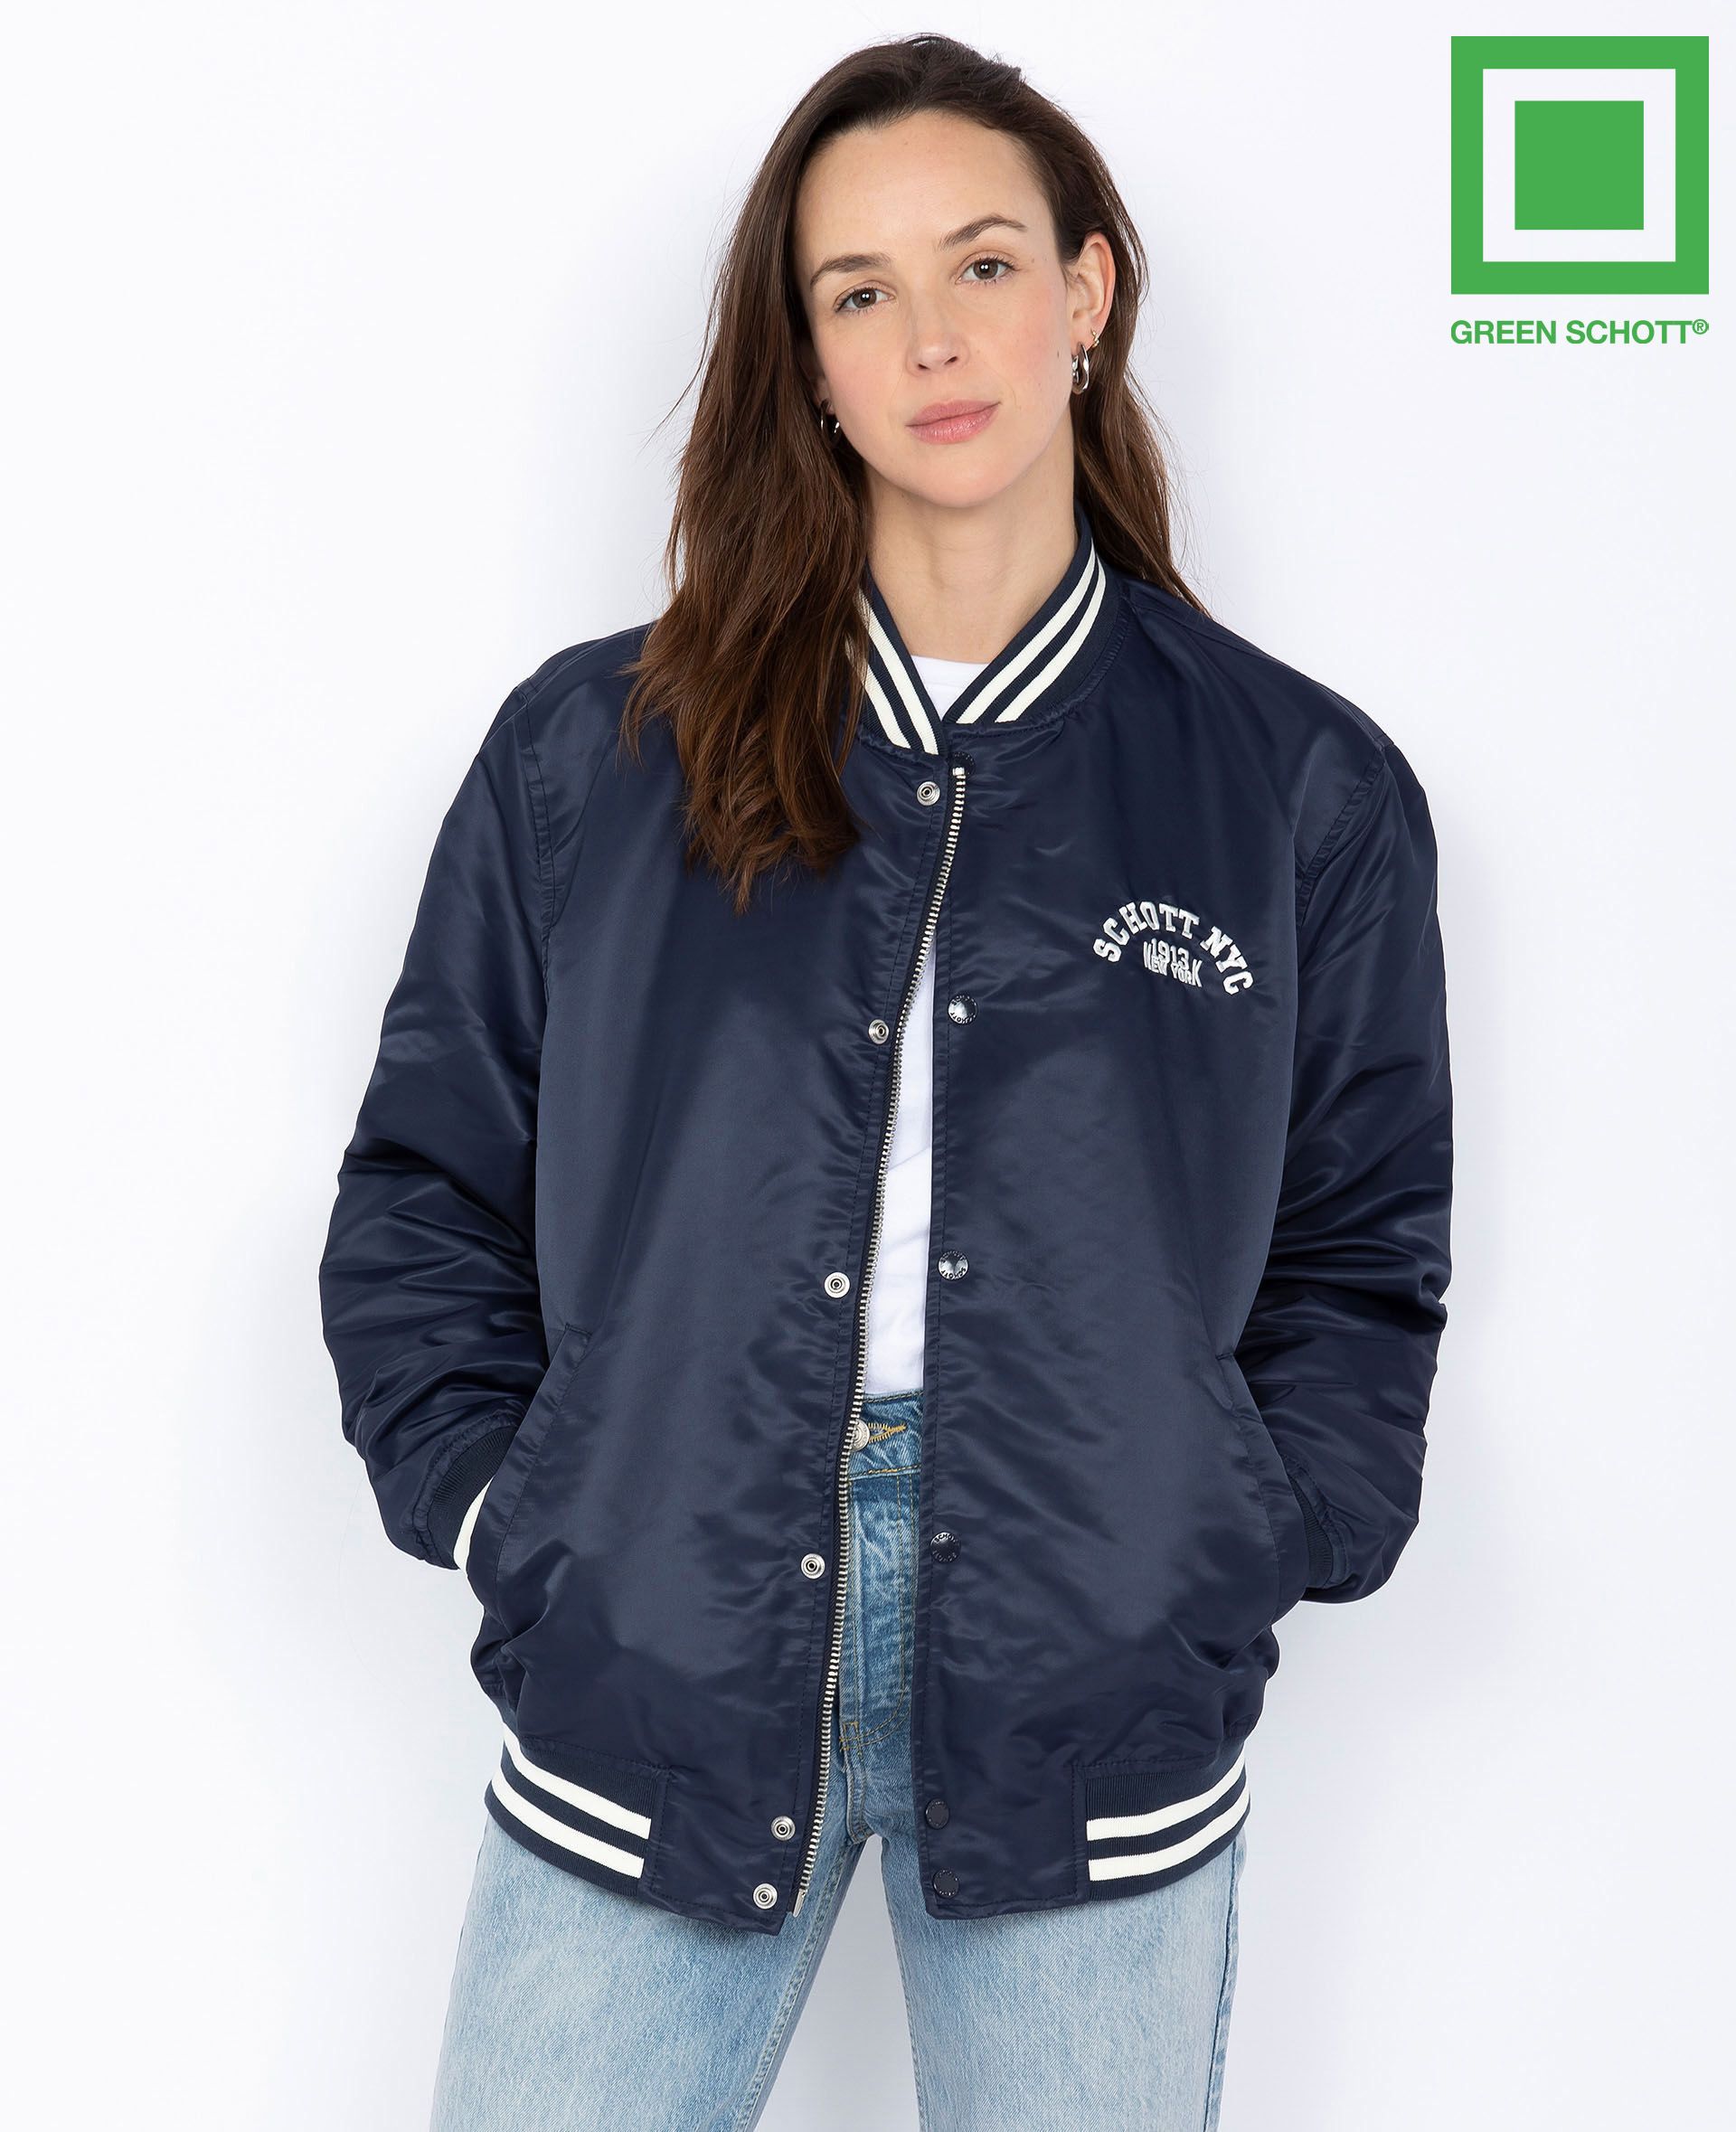 Buy The Souled Store Official Peanuts Snoopy Varsity Jacket For Women online-cokhiquangminh.vn